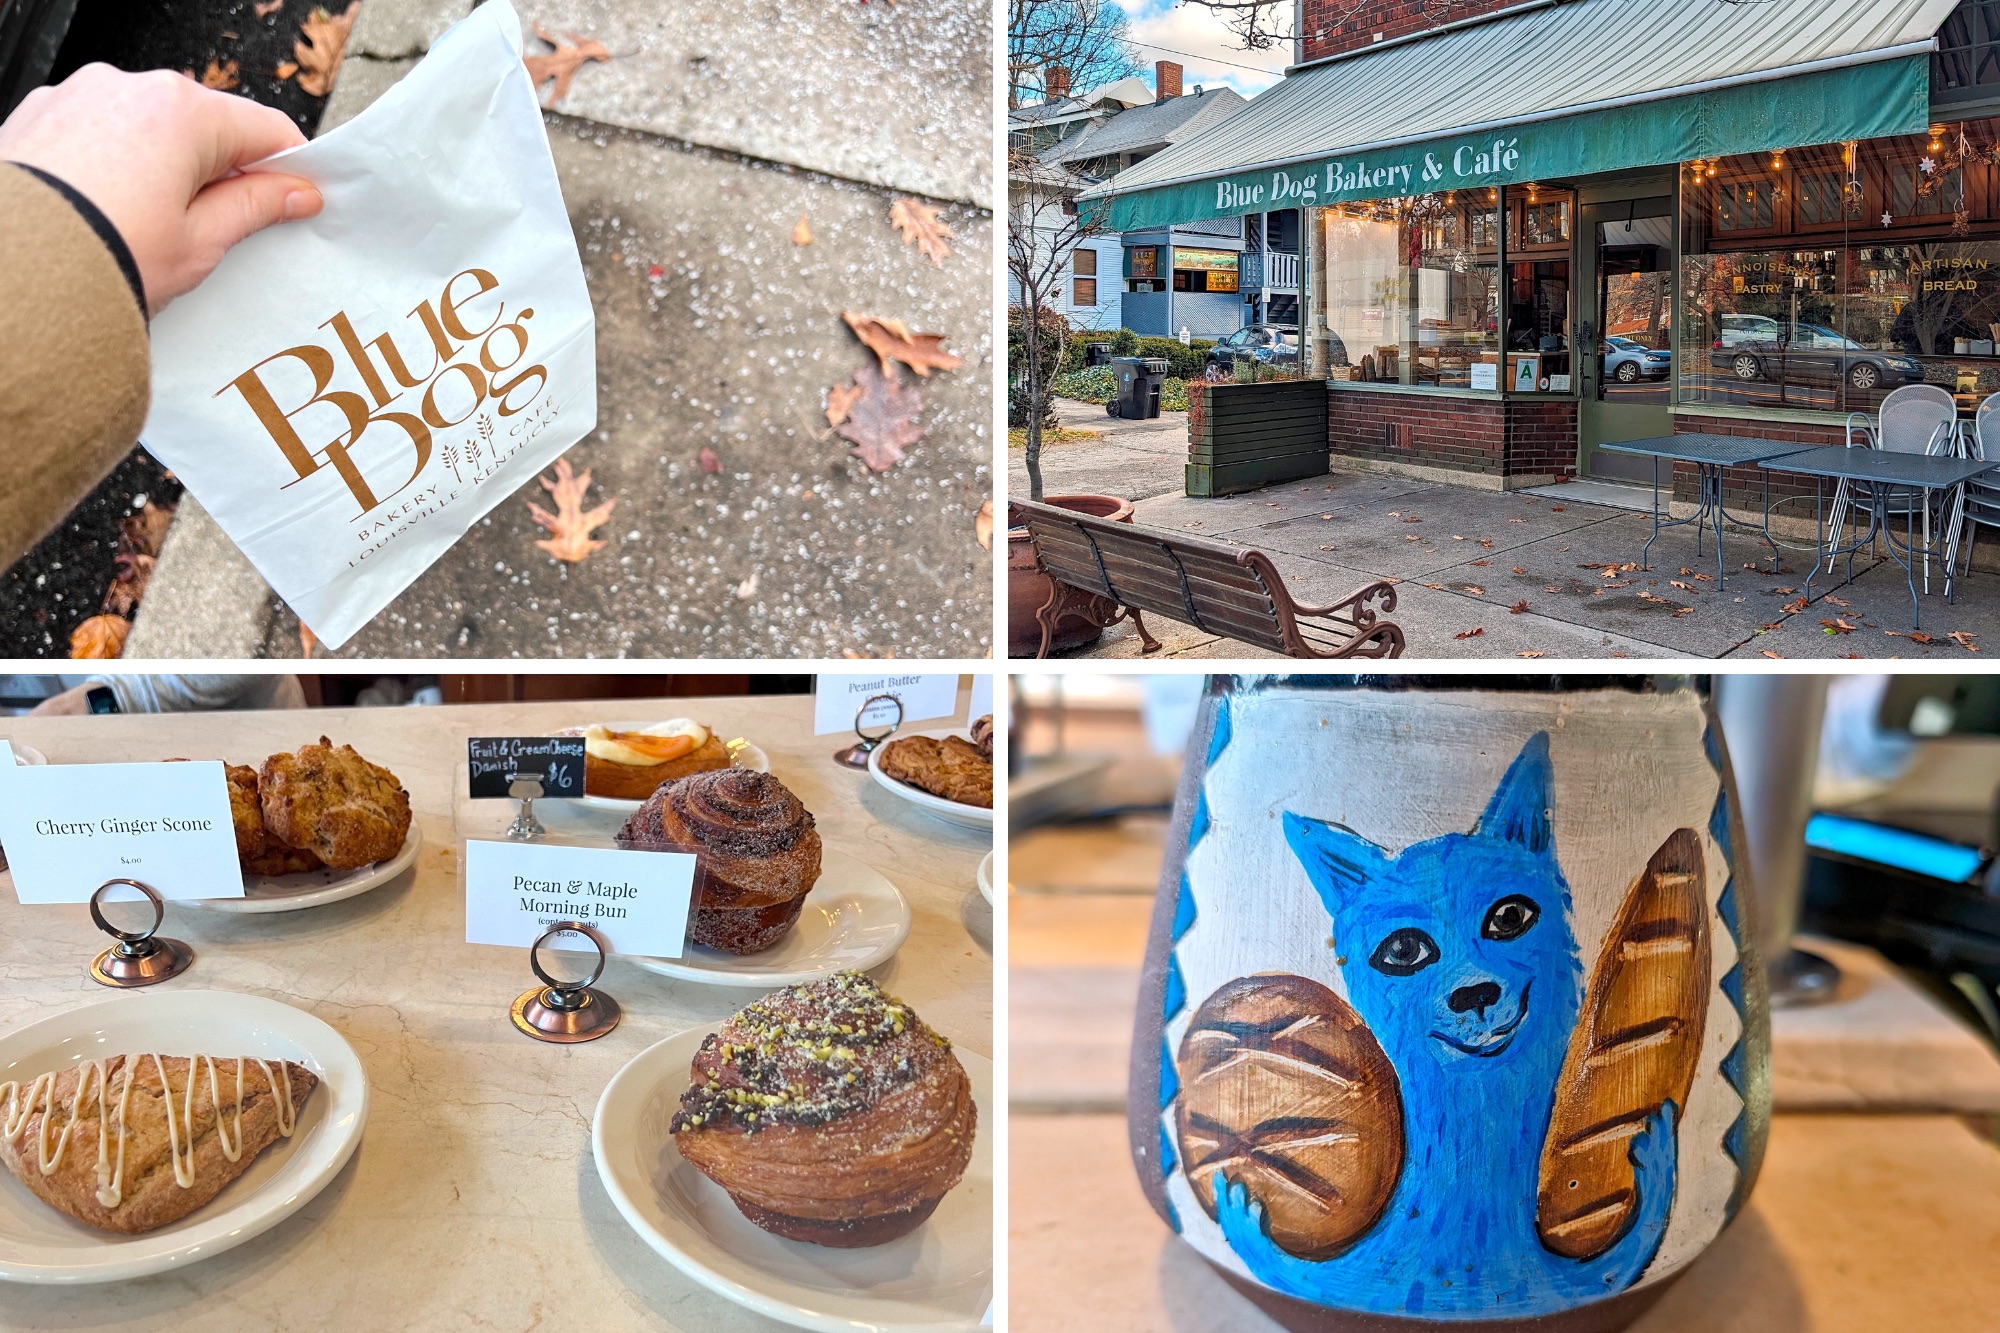 Four images of Blue Dog Bakery and Cafe and its pastries